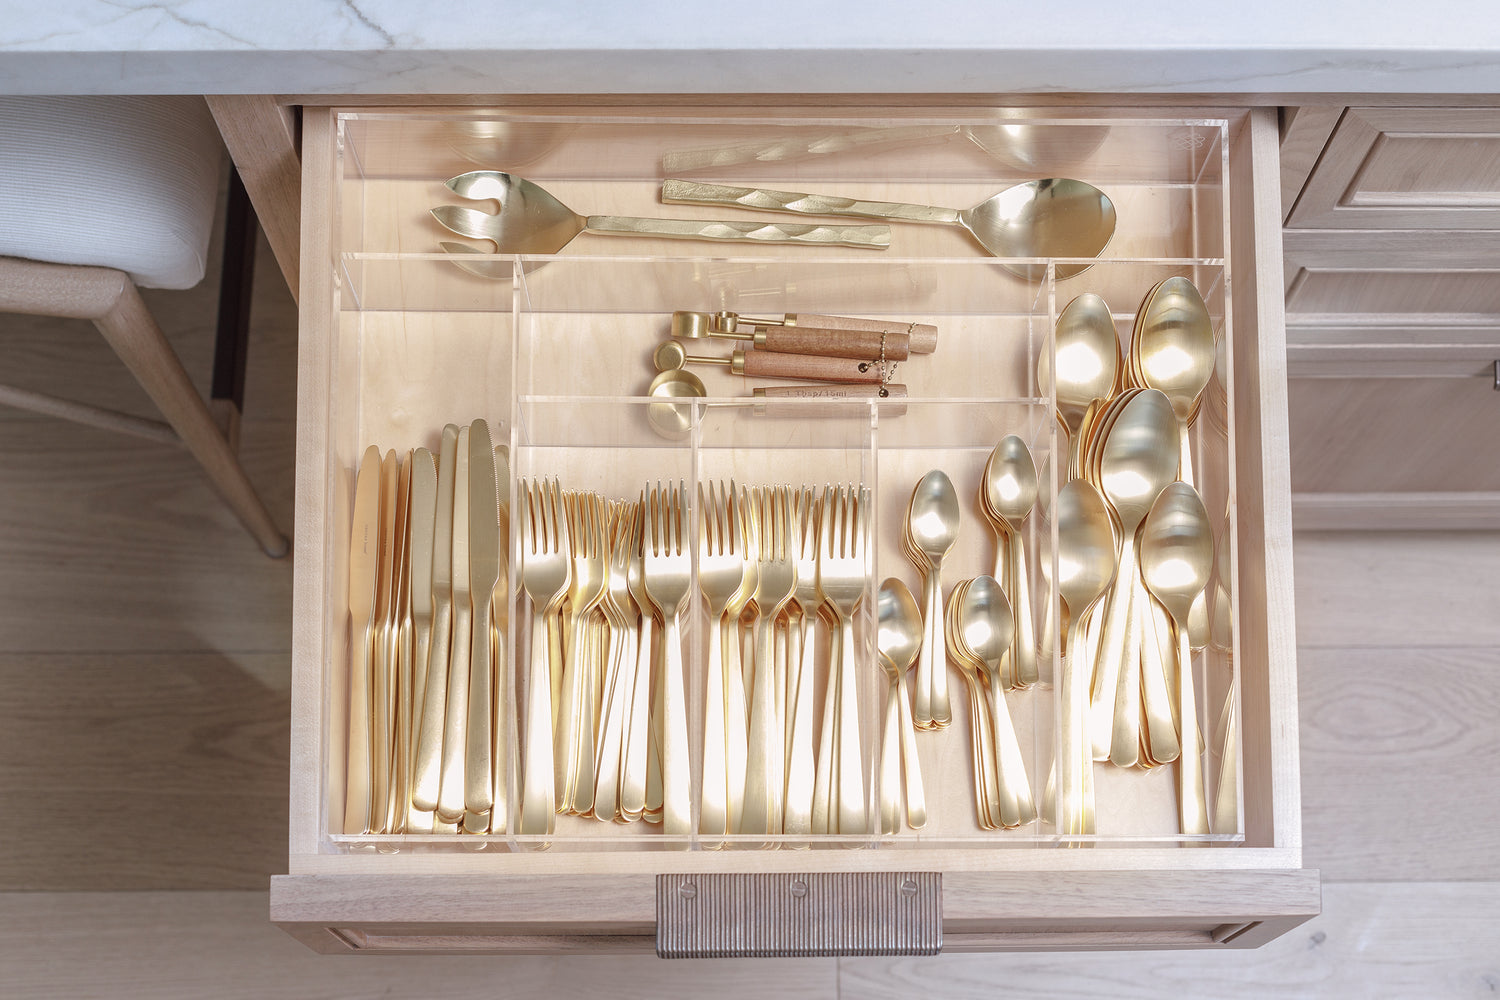 Beautiful kitchen cutlery drawer using the Susan custom-fit acrylic organizer to keep things tidy.